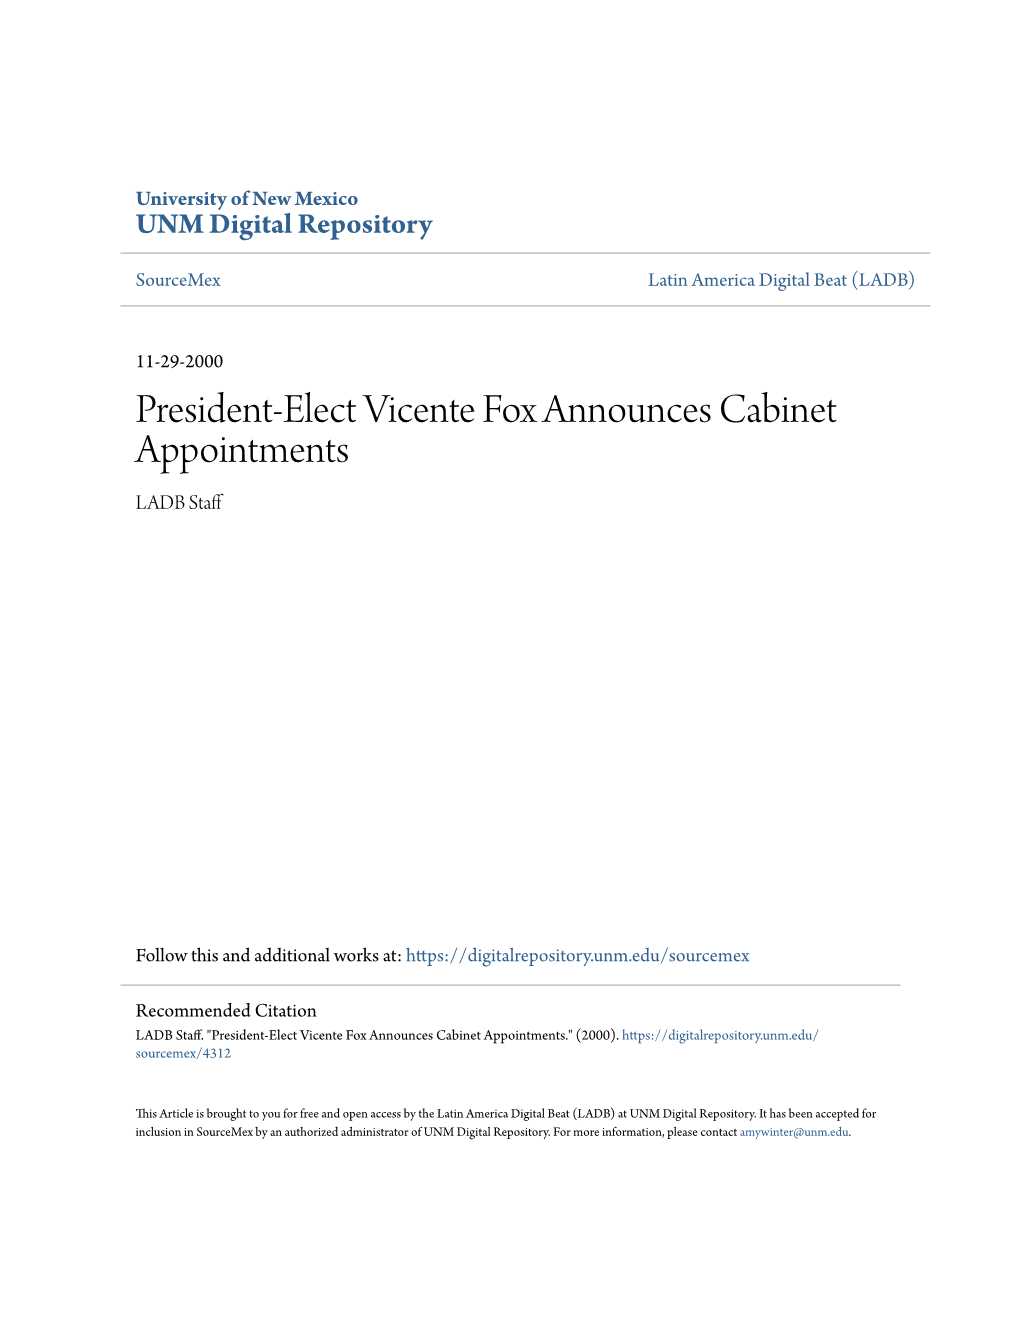 President-Elect Vicente Fox Announces Cabinet Appointments LADB Staff